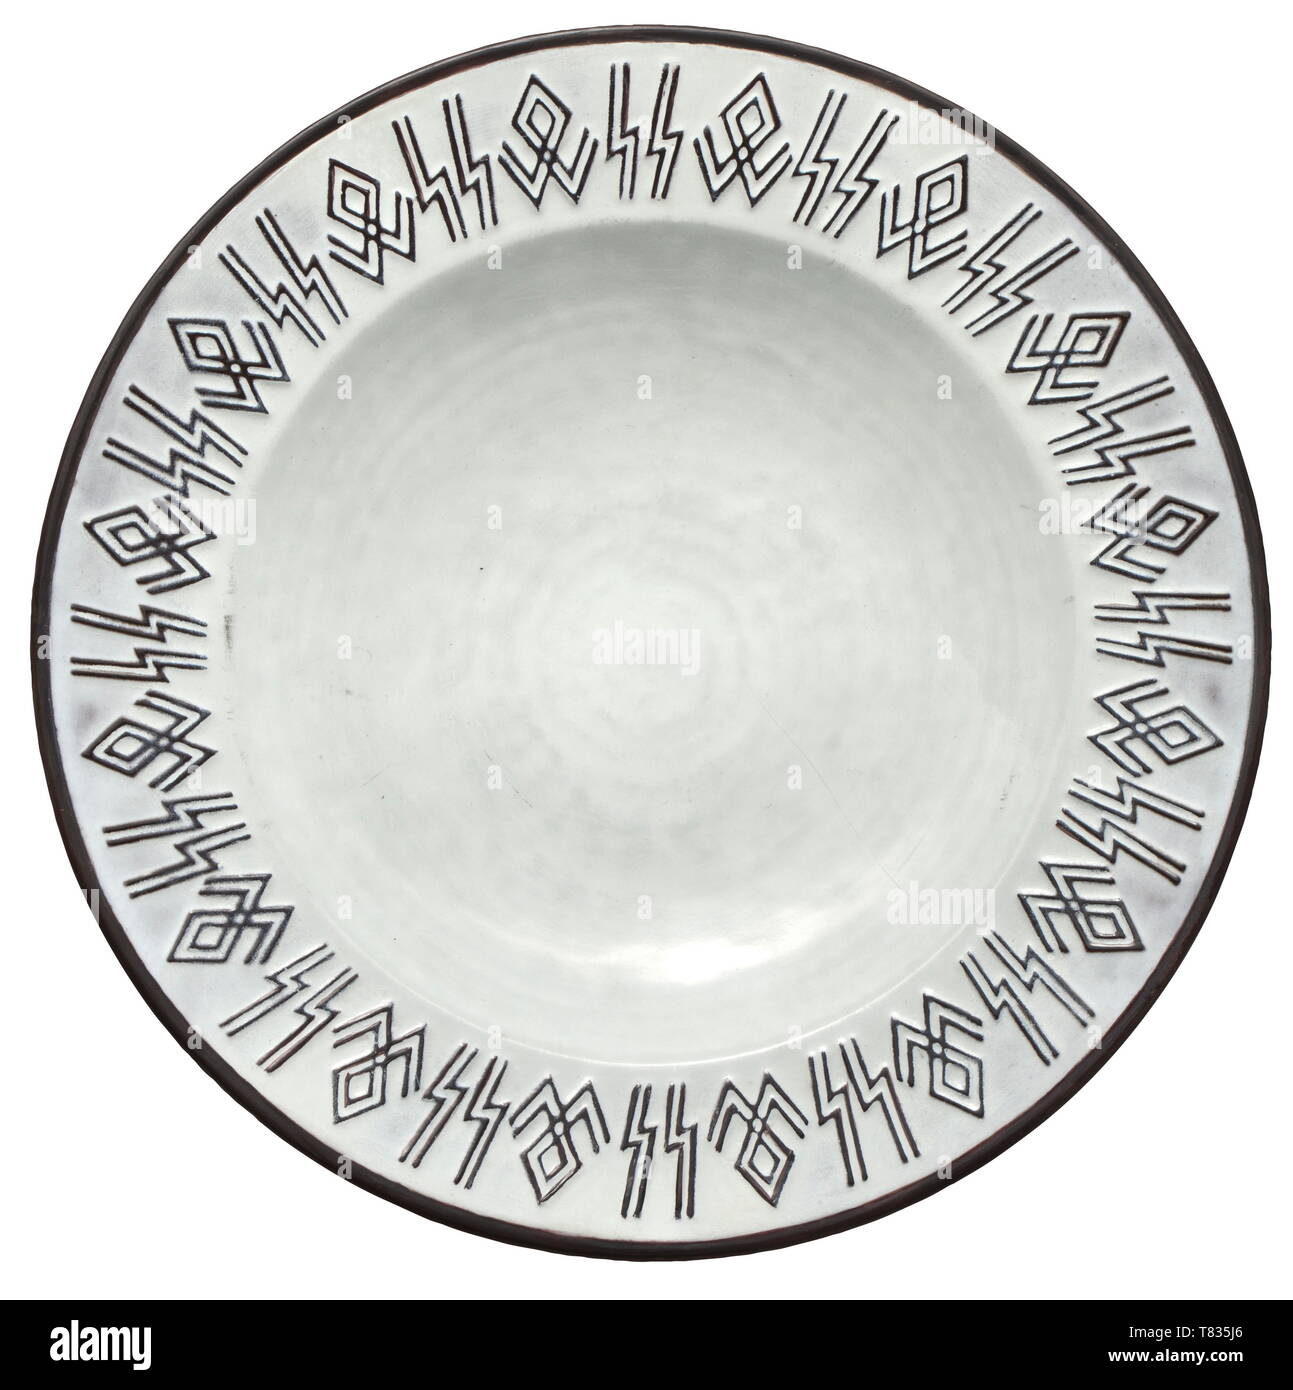 A Christmas wall plate Grey glazed stoneware with a frieze of runes around the border (brown glazed). The bottom with blue underglaze manufacturer's mark and brown inscription in relief 'Der Chef des SS-Hauptamtes 24. 12. 41'. Slightly scratched. Diameter circa 30.5 cm. Very rare. historic, historical, 20th century, 1930s, 1940s, Waffen-SS, armed division of the SS, armed service, armed services, NS, National Socialism, Nazism, Third Reich, German Reich, Germany, military, militaria, utensil, piece of equipment, utensils, object, objects, stills, clipping, clippings, cut ou, Editorial-Use-Only Stock Photo